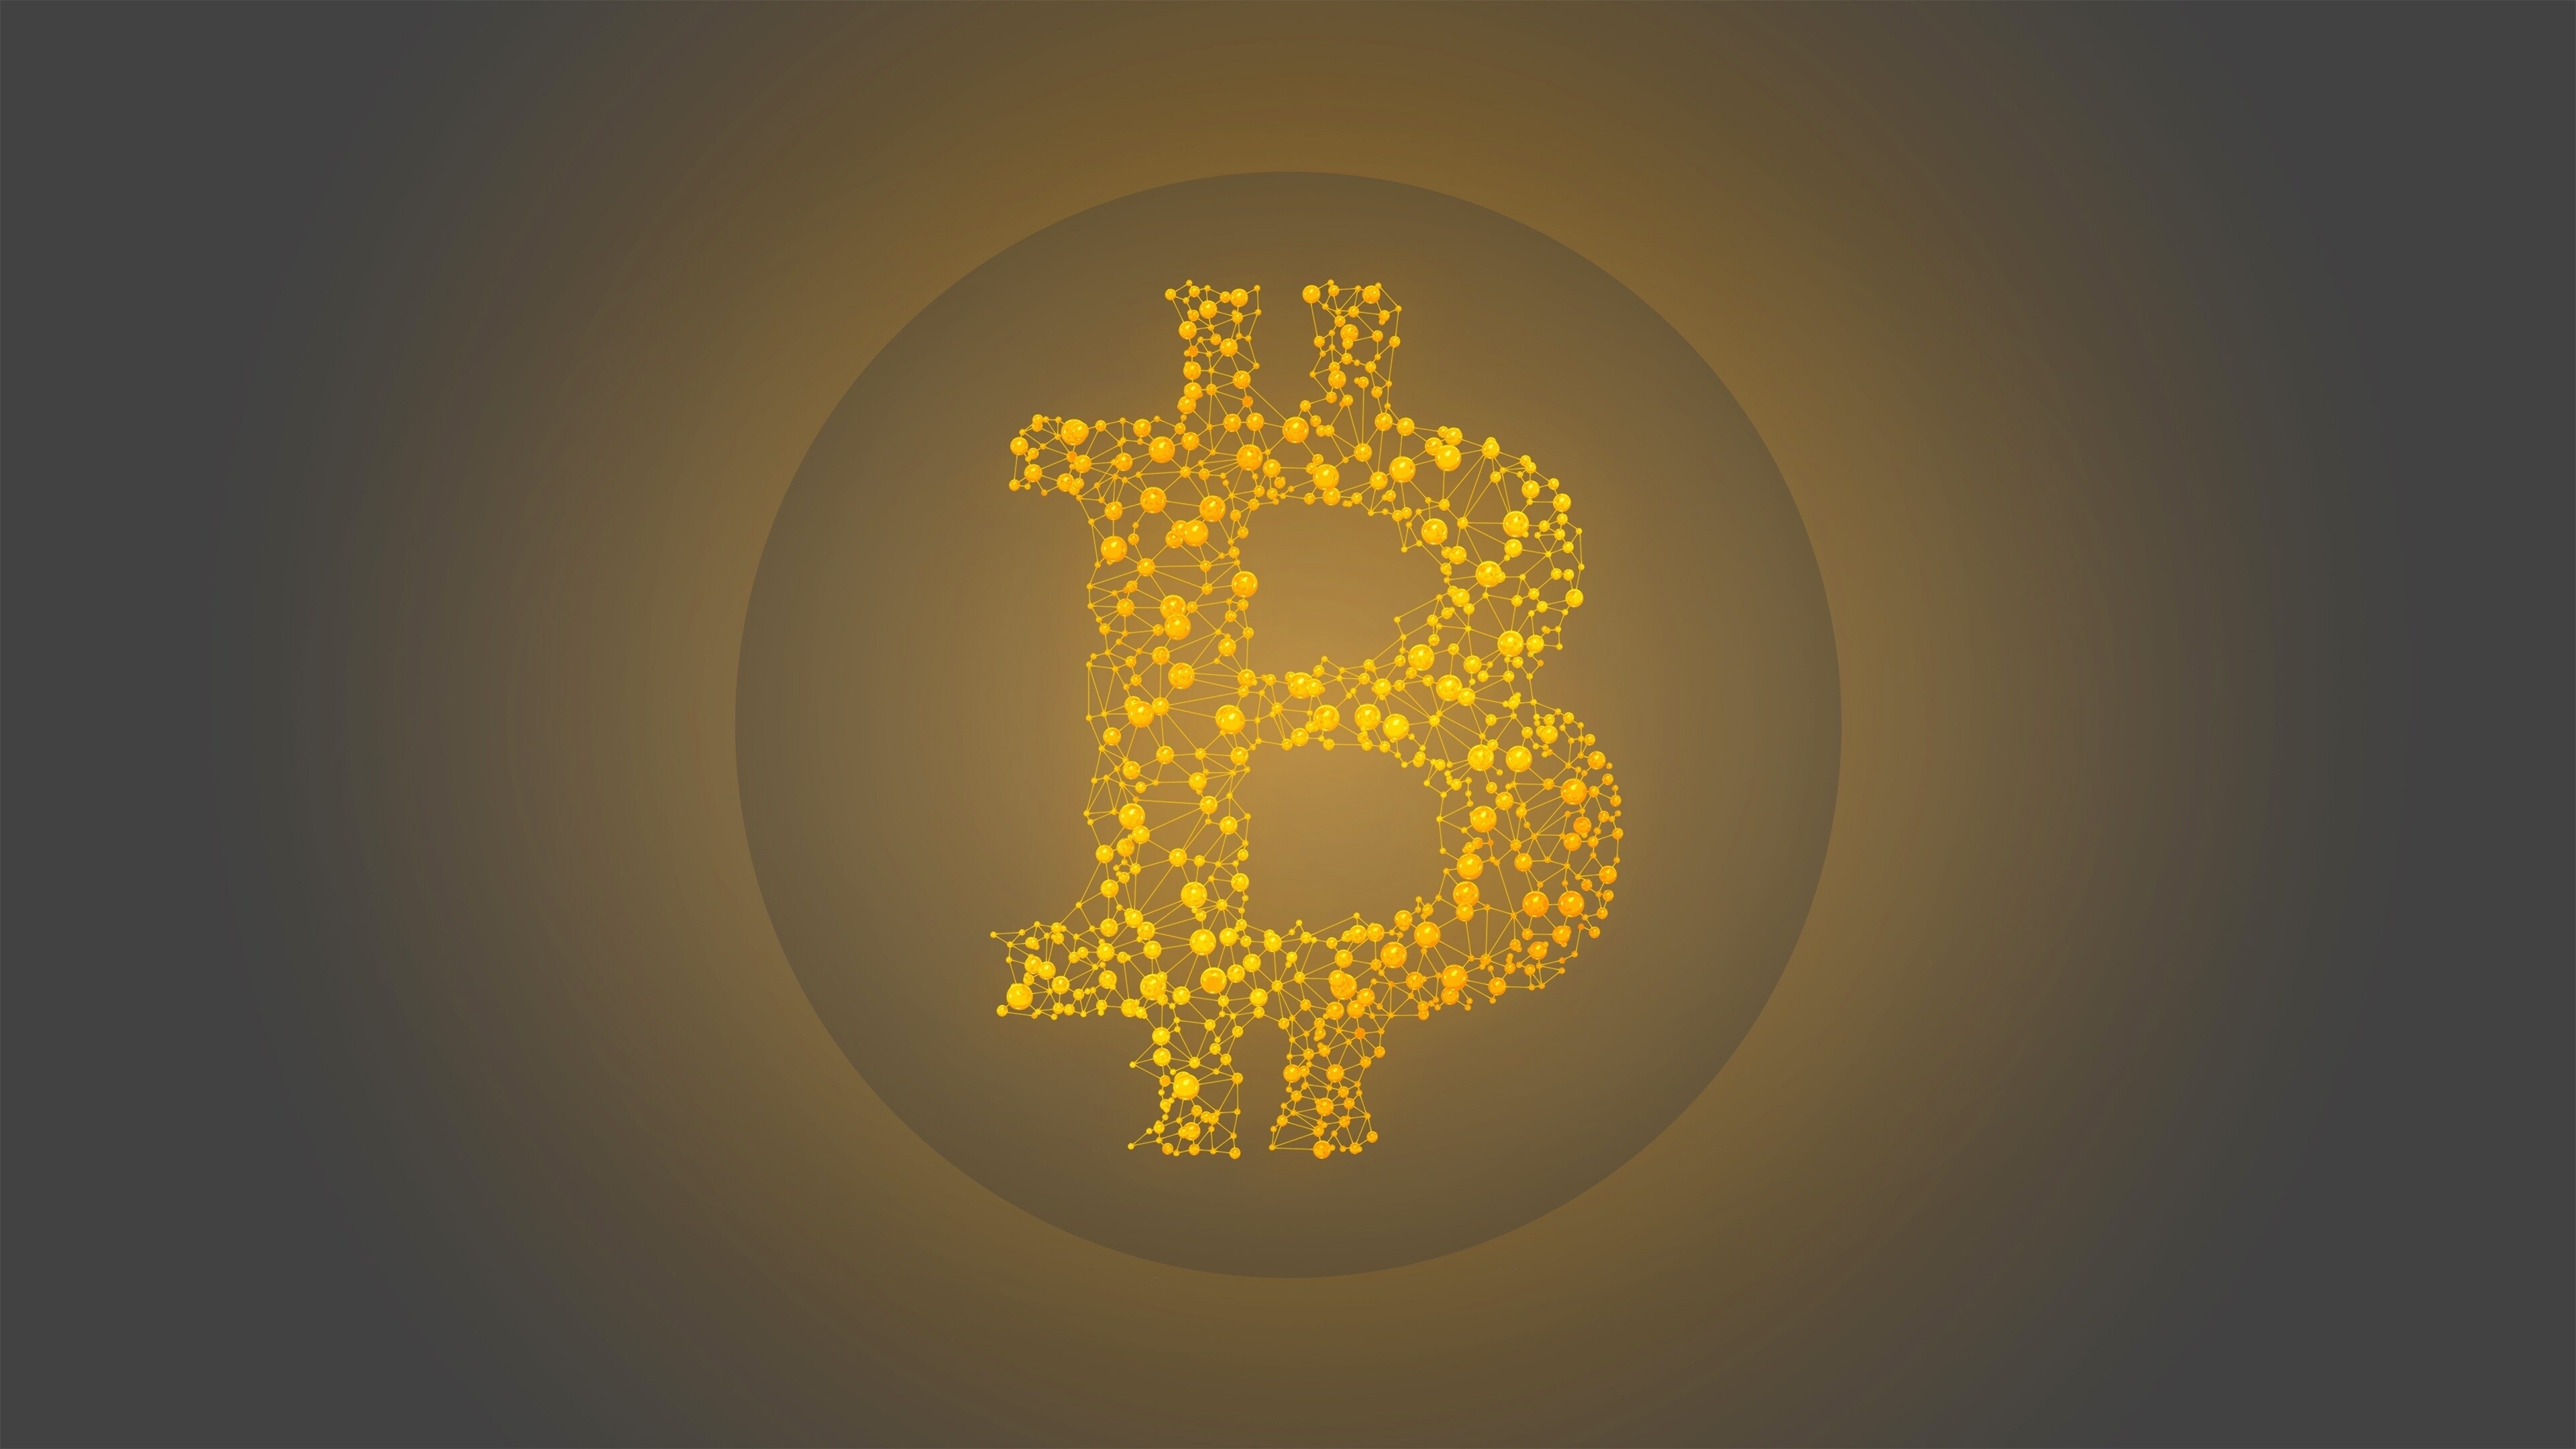 Bitcoin: Decentralized digital currency that you can buy, sell and exchange directly, without an intermediary like a bank. 3840x2160 4K Wallpaper.